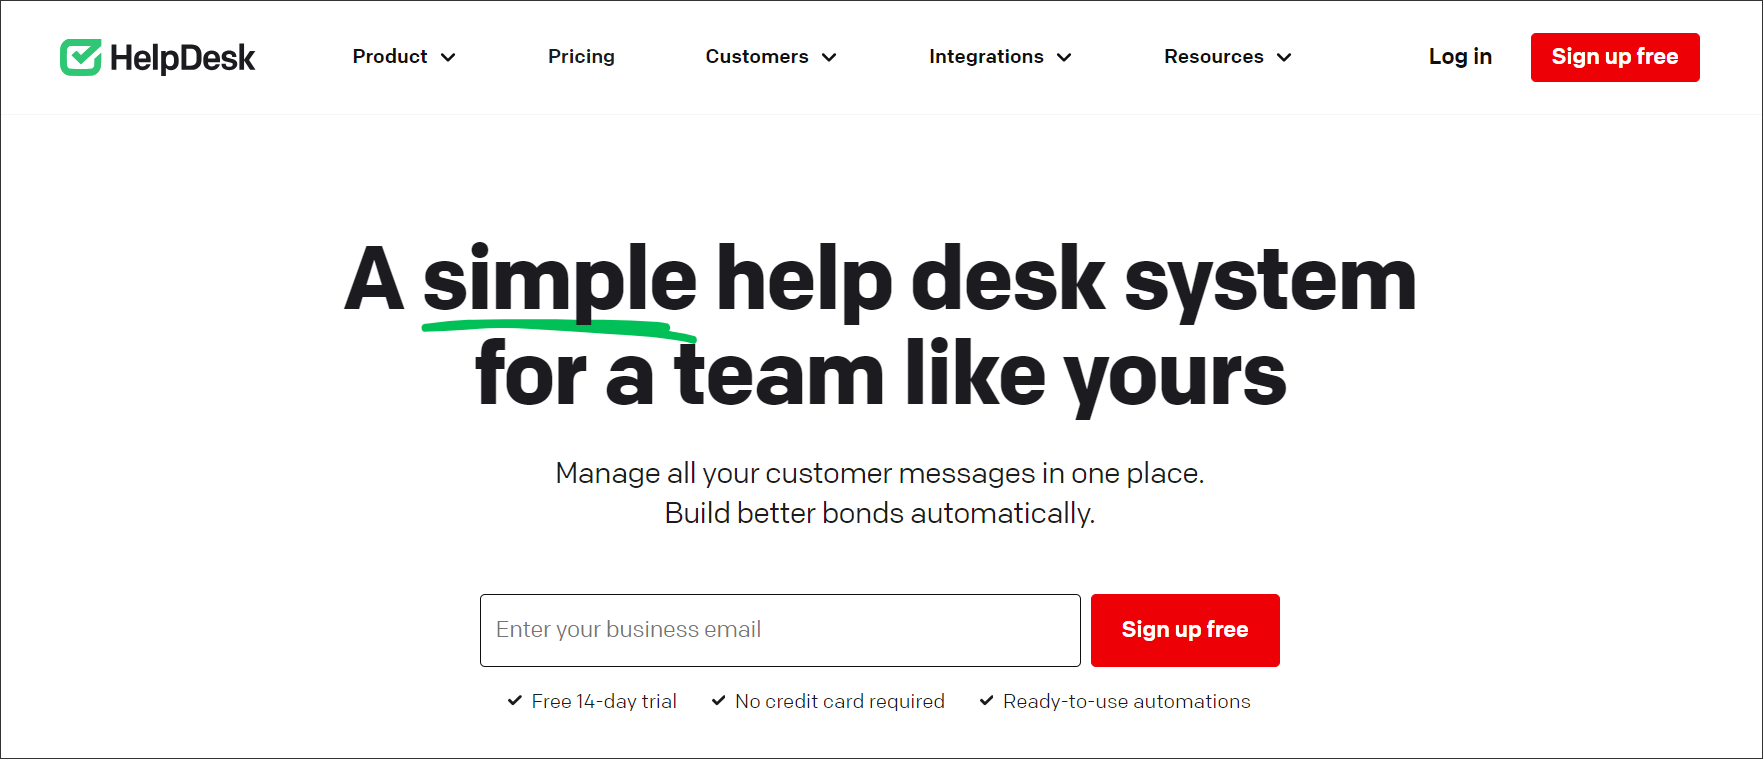  HelpDesk home page